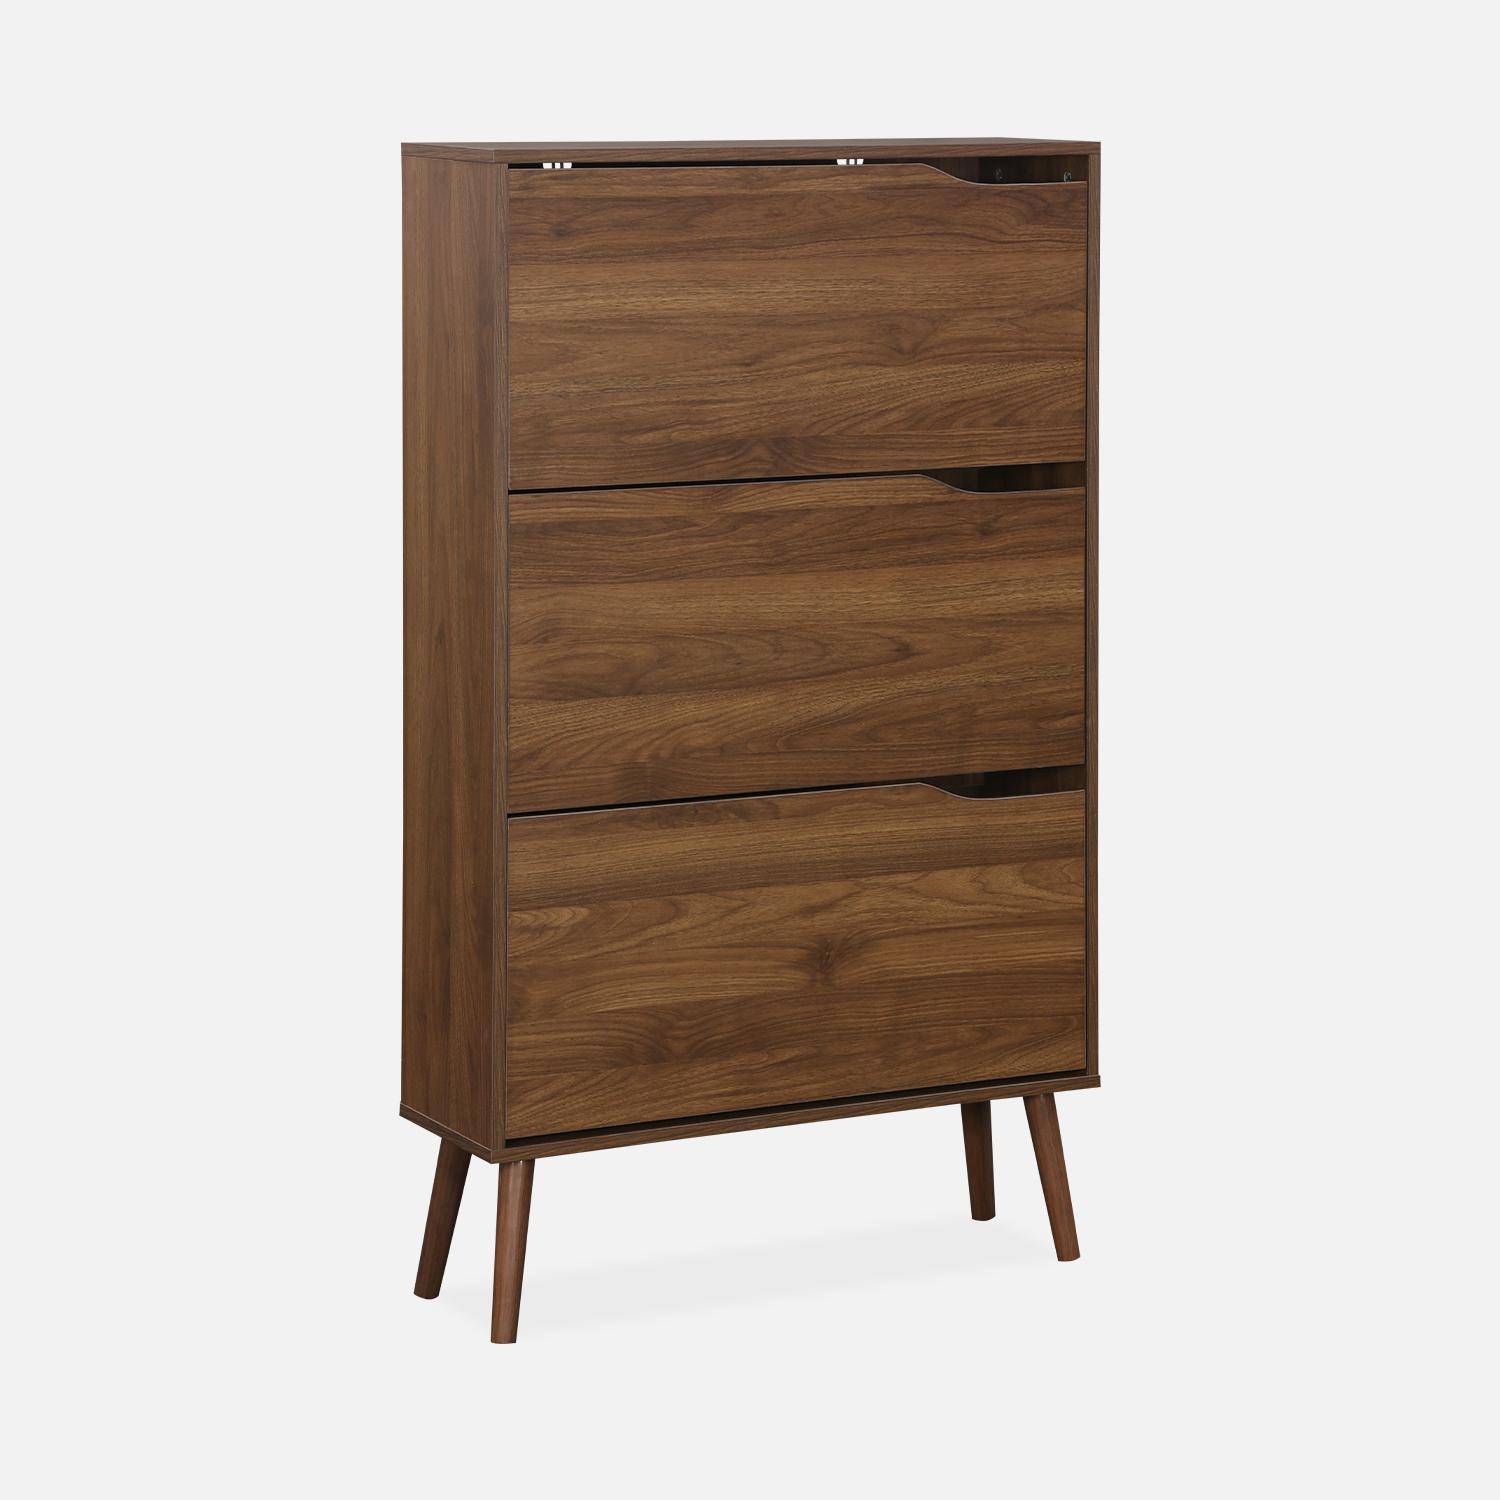 Scandinavian walnut shoe cabinet with 3 flap doors for 18 pairs of shoes Photo5